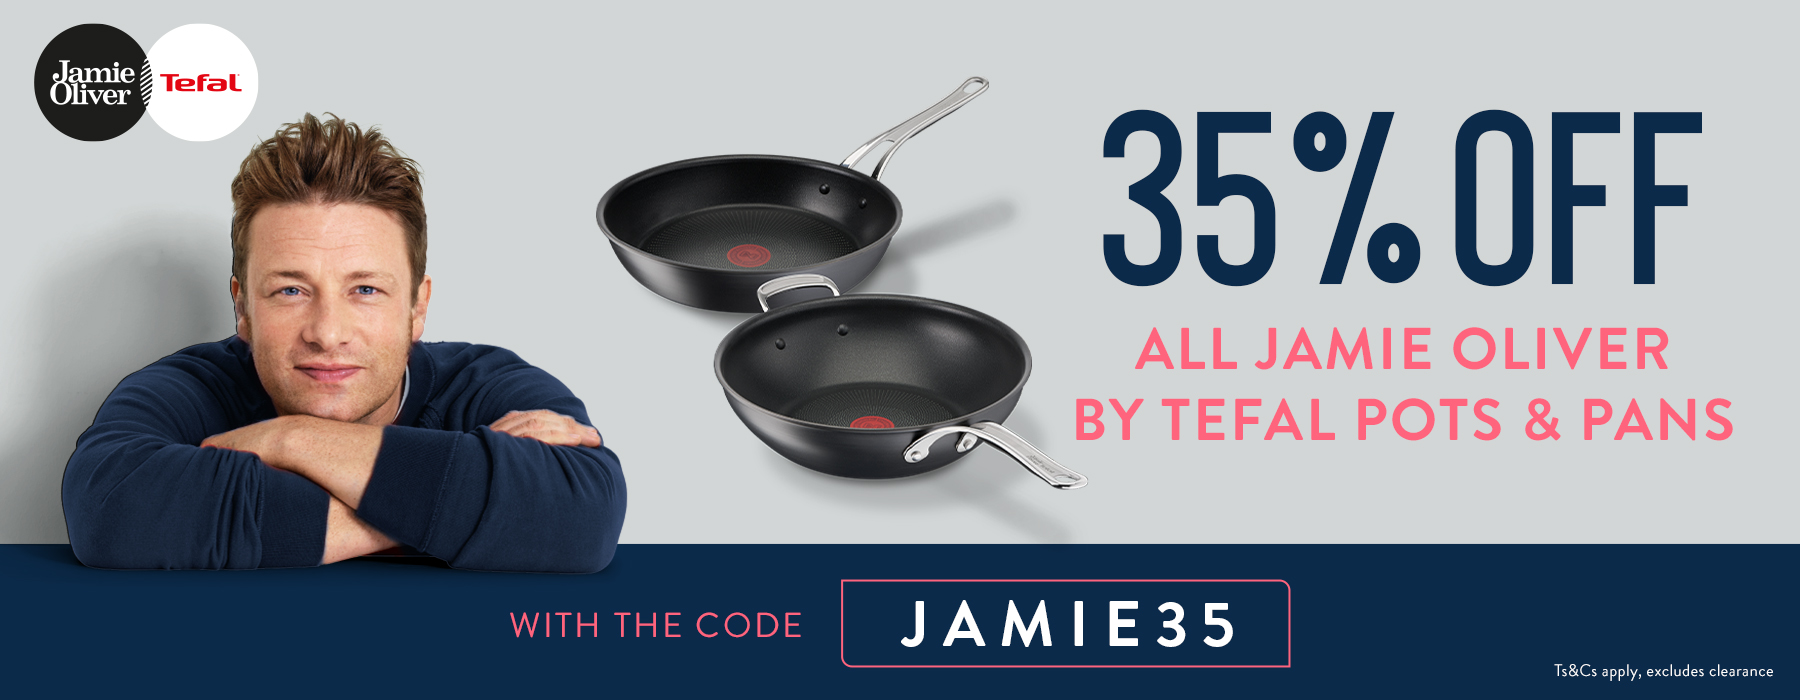 cate-promo-banner-Jamie Oliver by Tefal